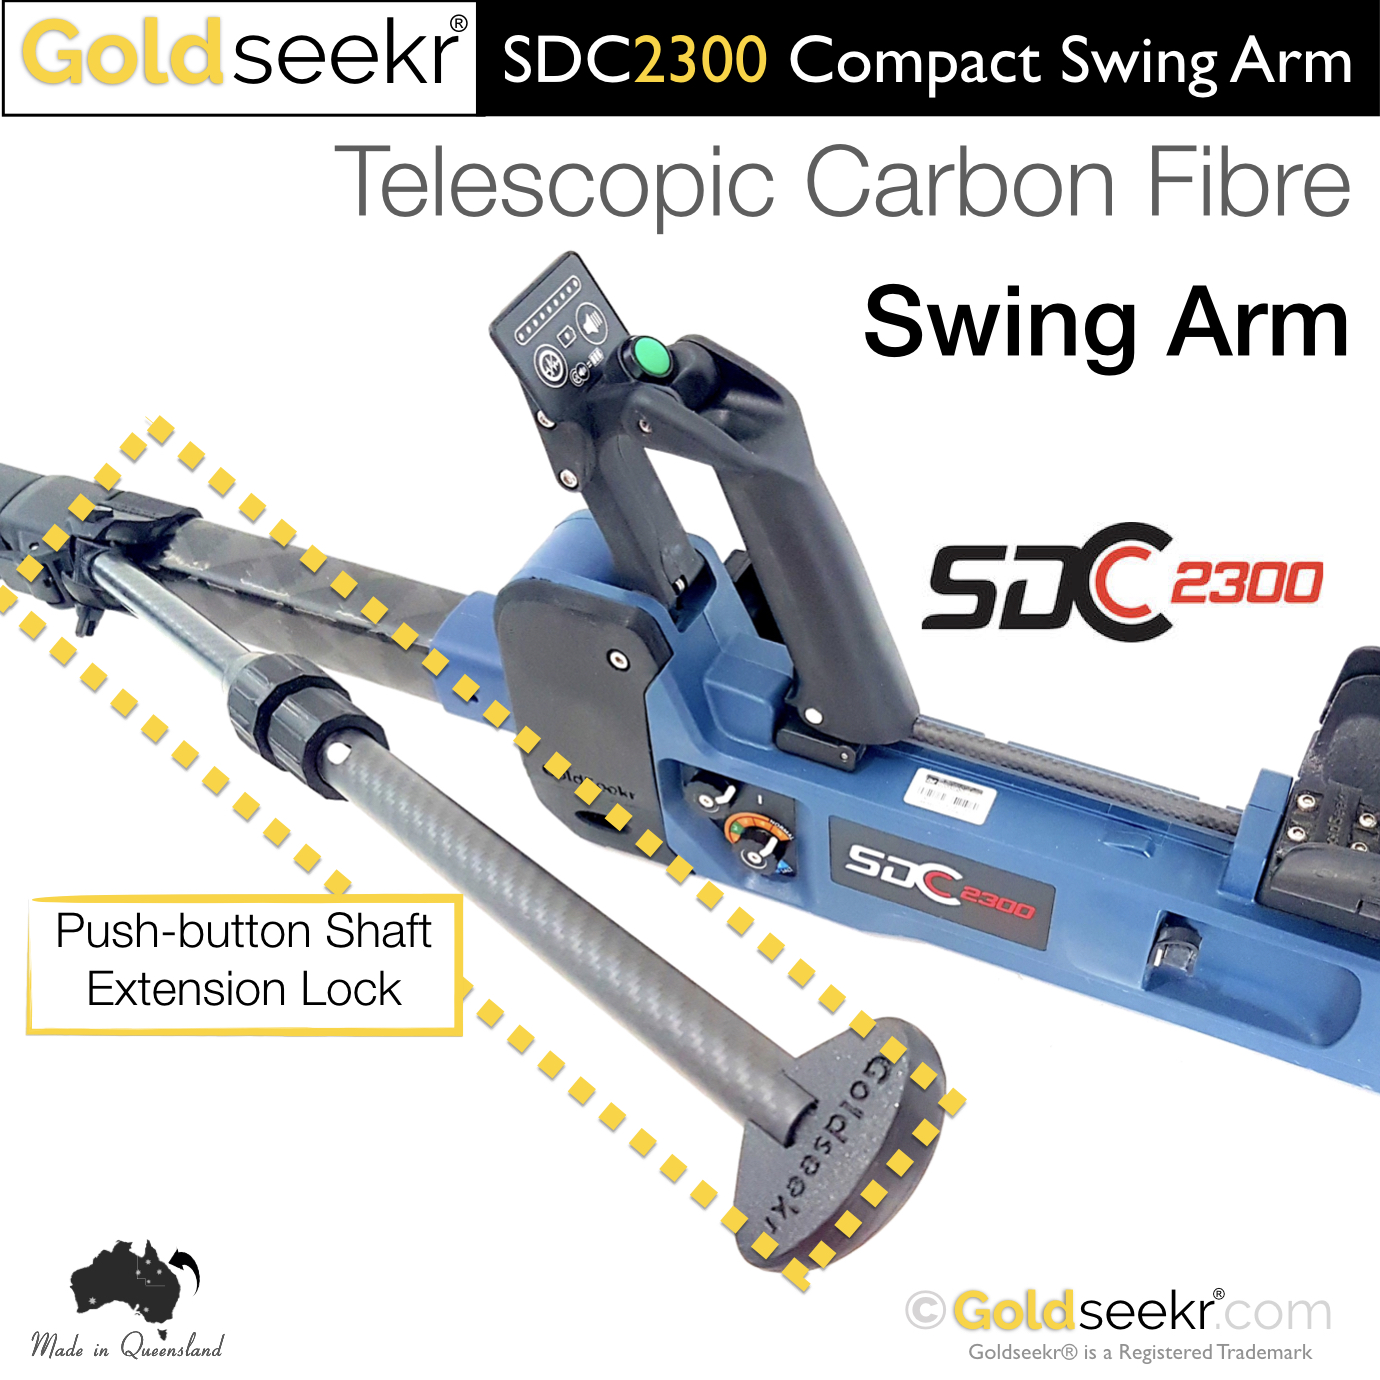 👍  Make finding gold easier with a Goldseekr Telescopic Swing Arm for your Minelab SDC2300.